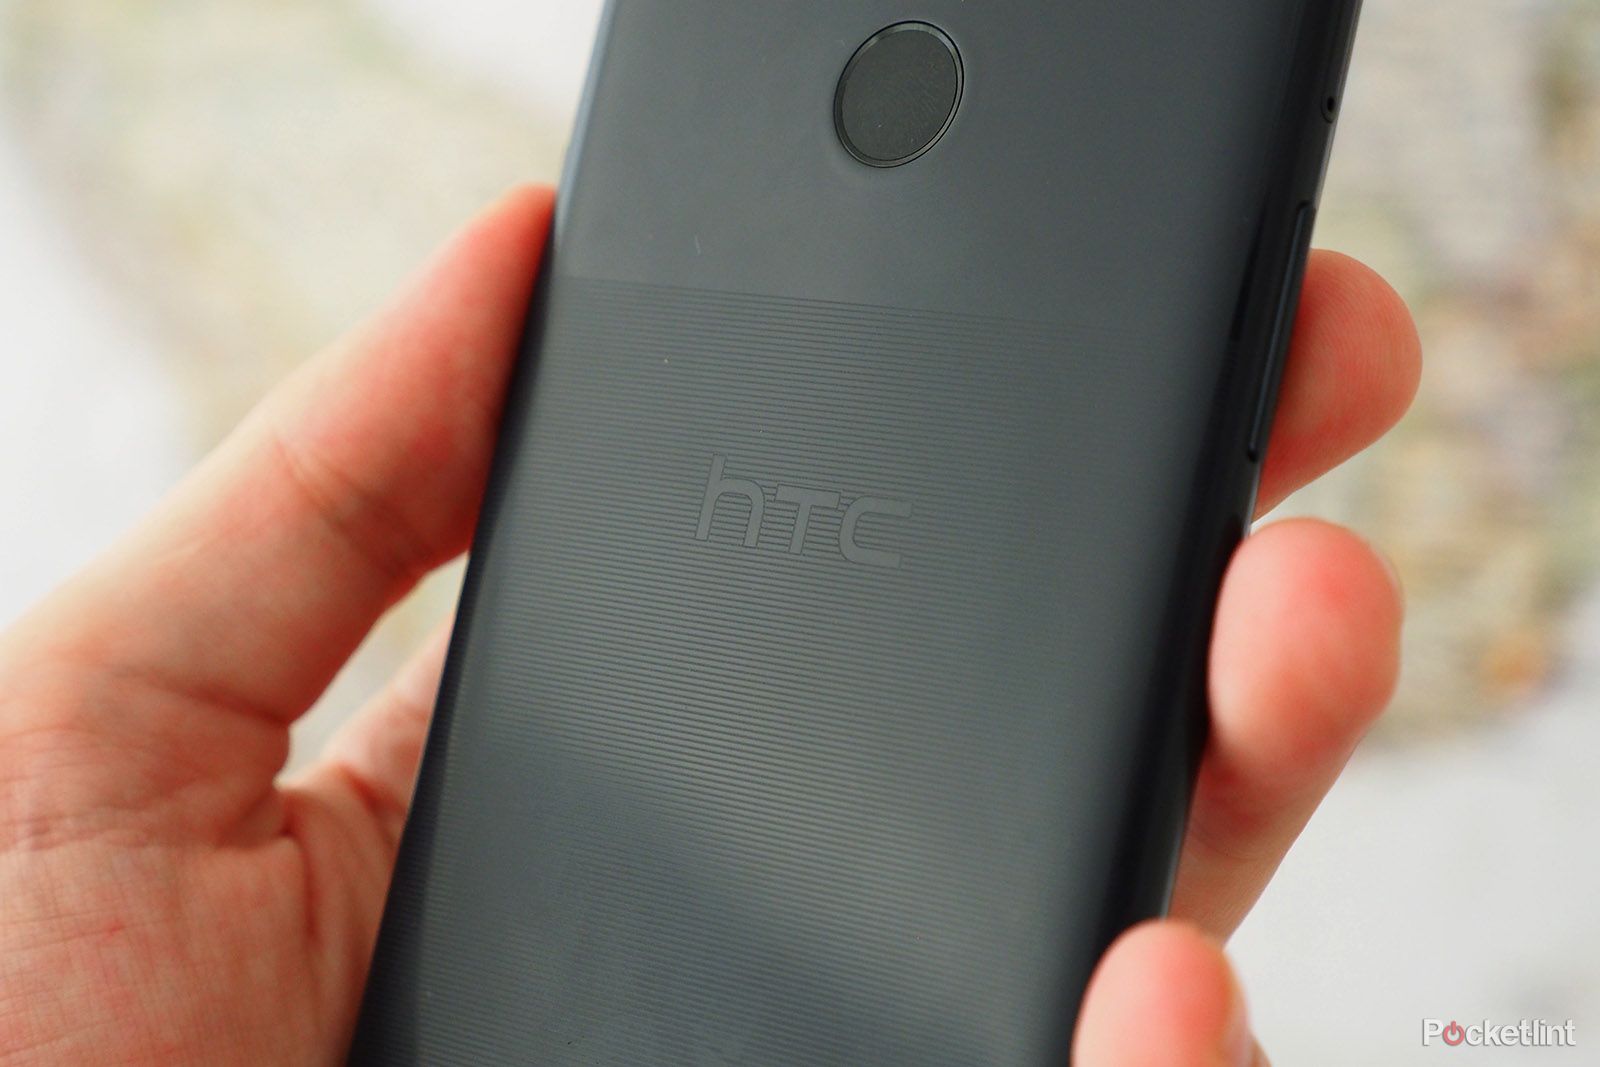 HTC pulls its phones from sale in UK over IP infringement claim image 1